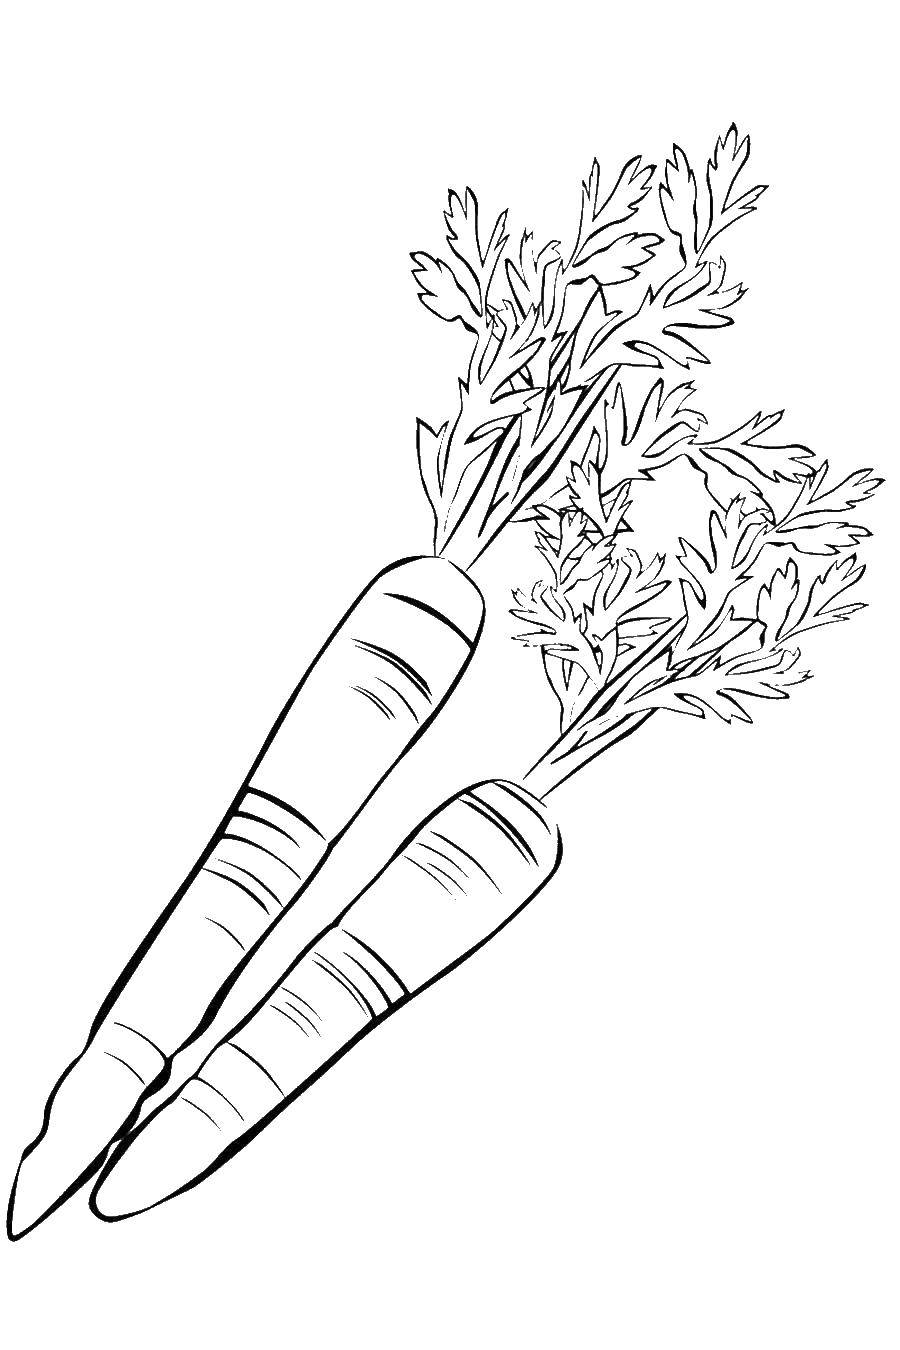 Coloring Carrots. Category vegetables. Tags:  Vegetables, carrots.